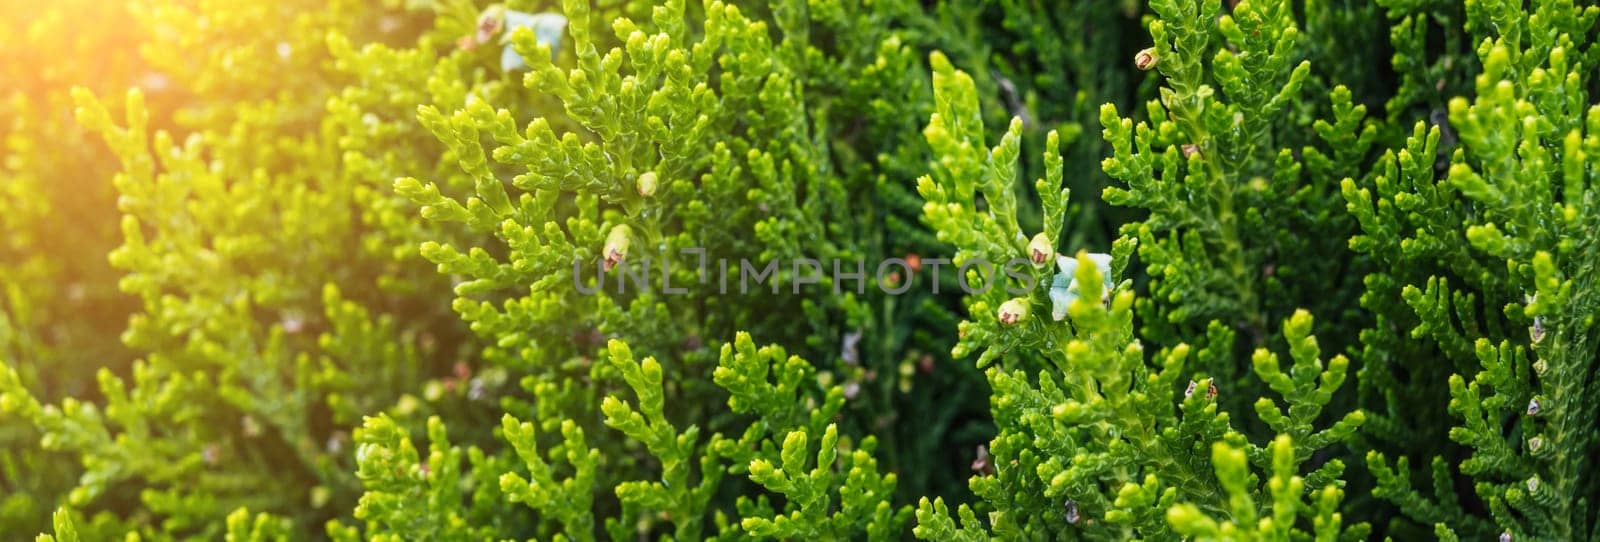 green branches of thuja in close-up on a sunny day in summer